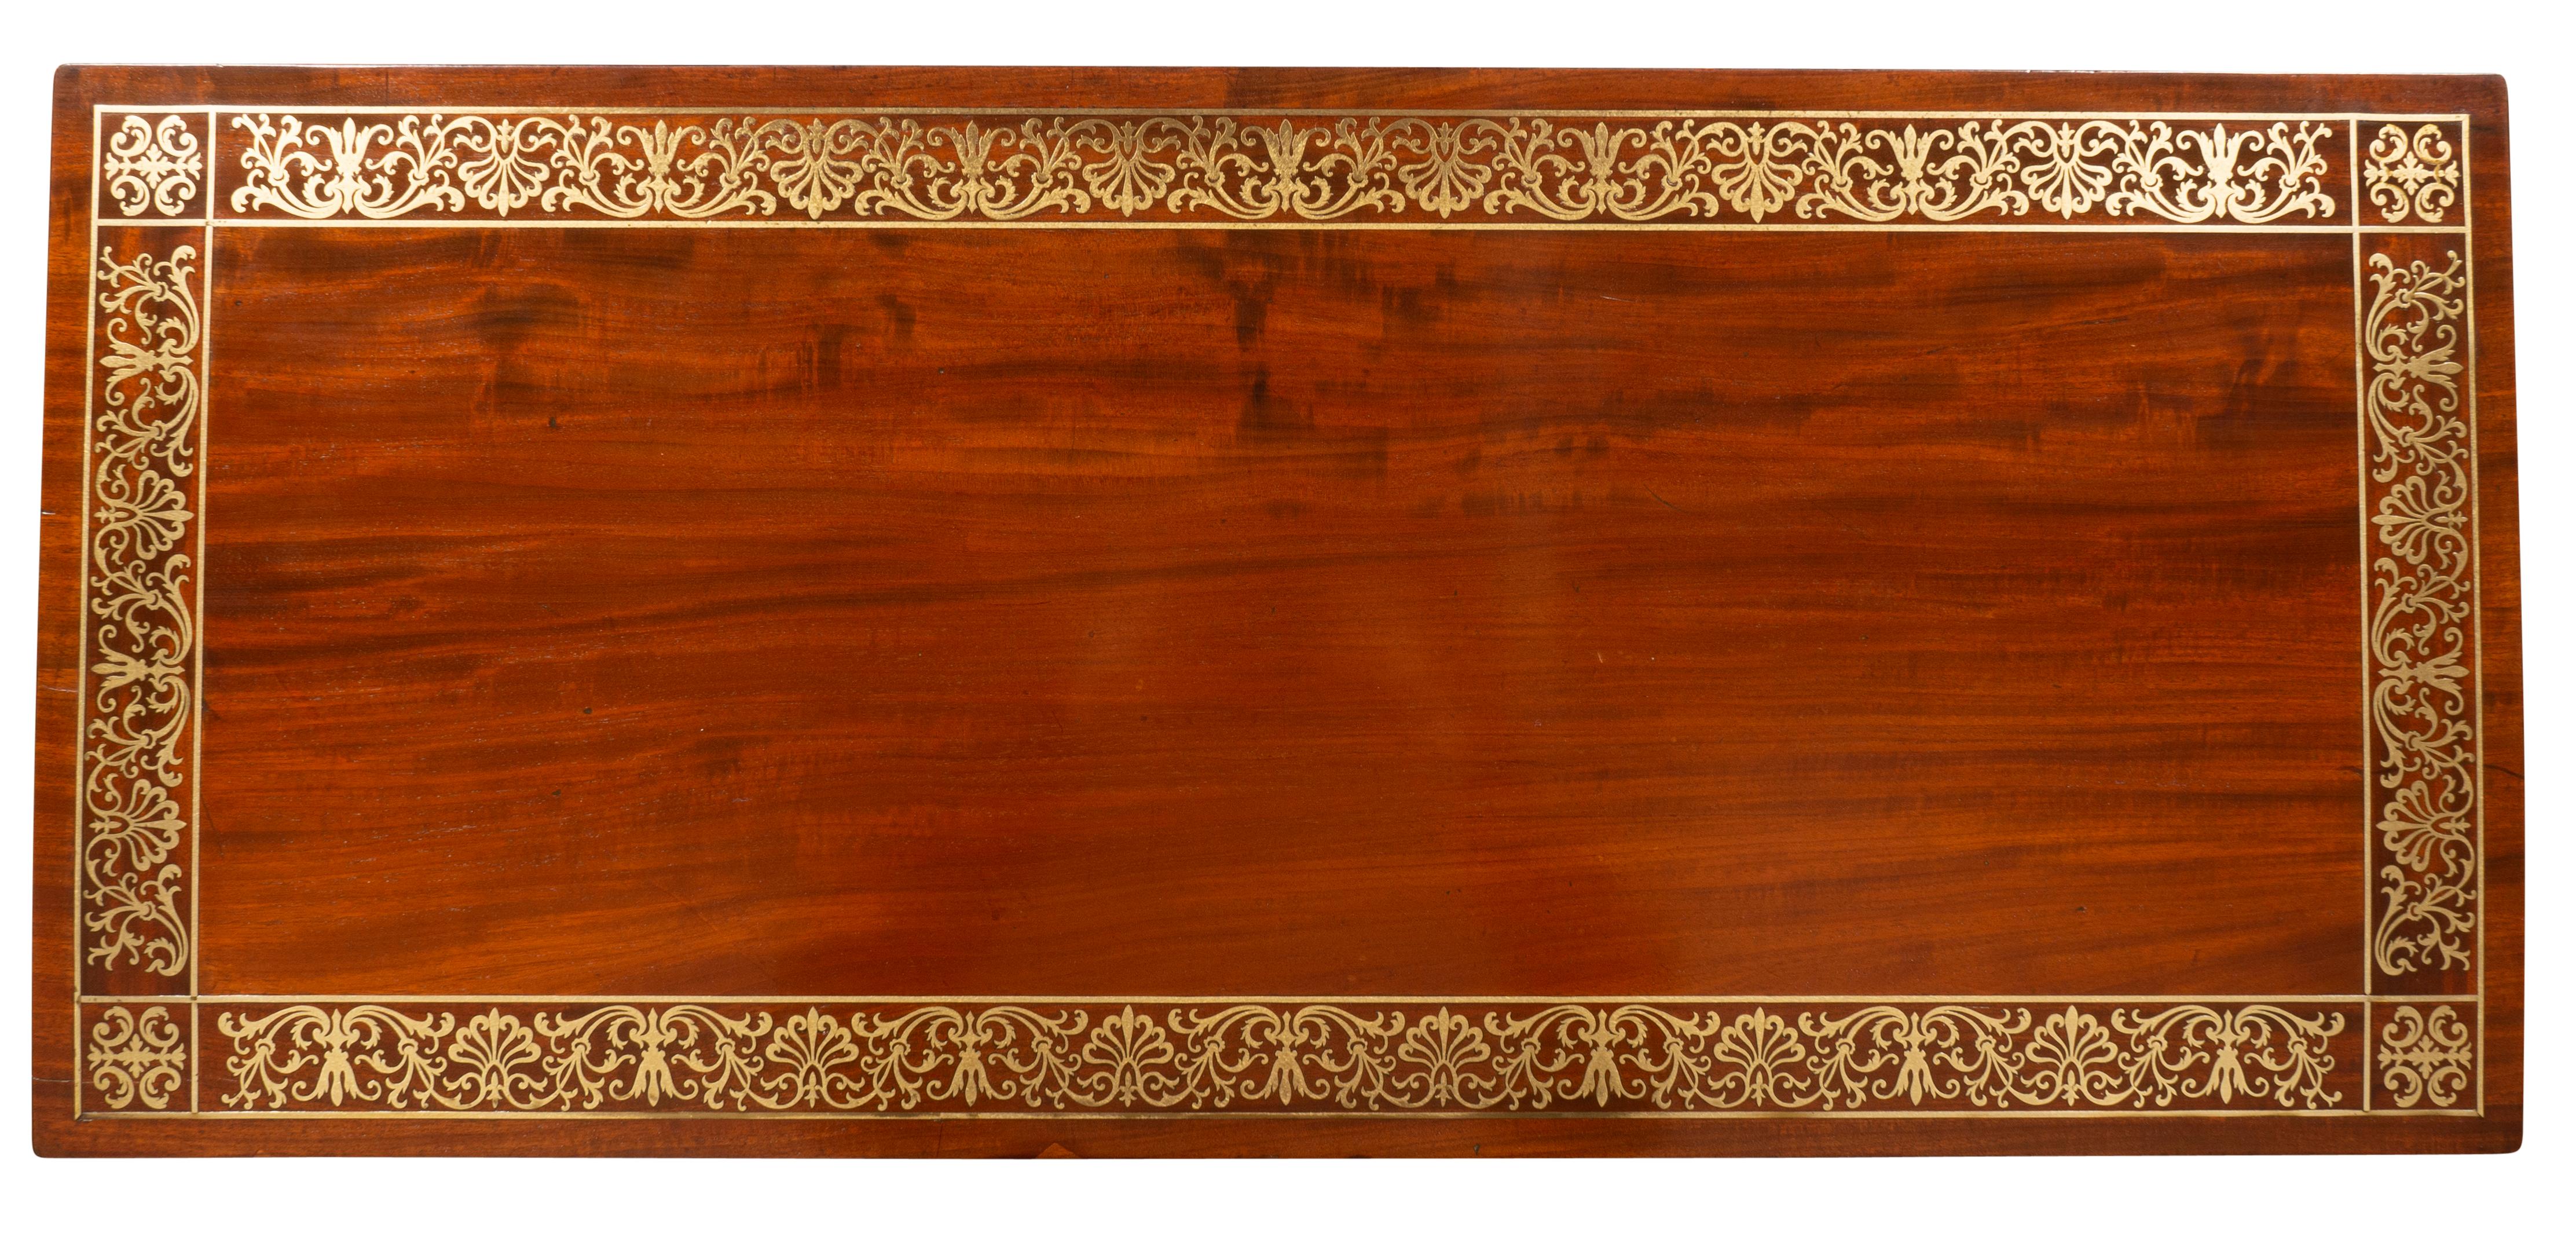 Suite Of Five Regency Brass Inlaid Side Cabinets From Westport House County Mayo For Sale 2